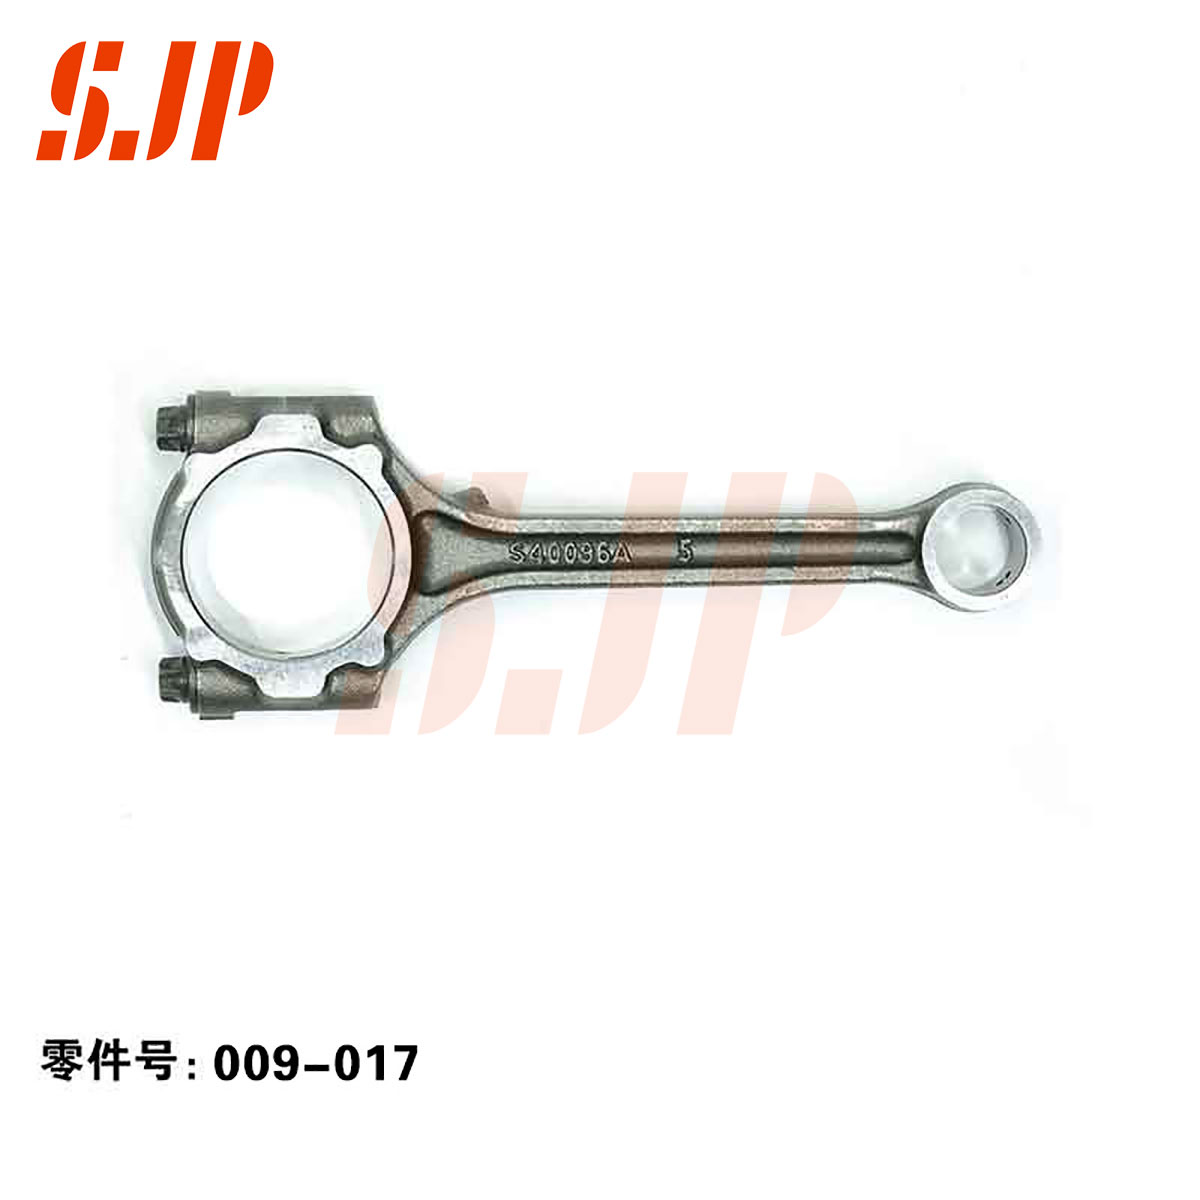 SJ-009-017 Connecting Rod For Changan Auto 473-EA12/H01